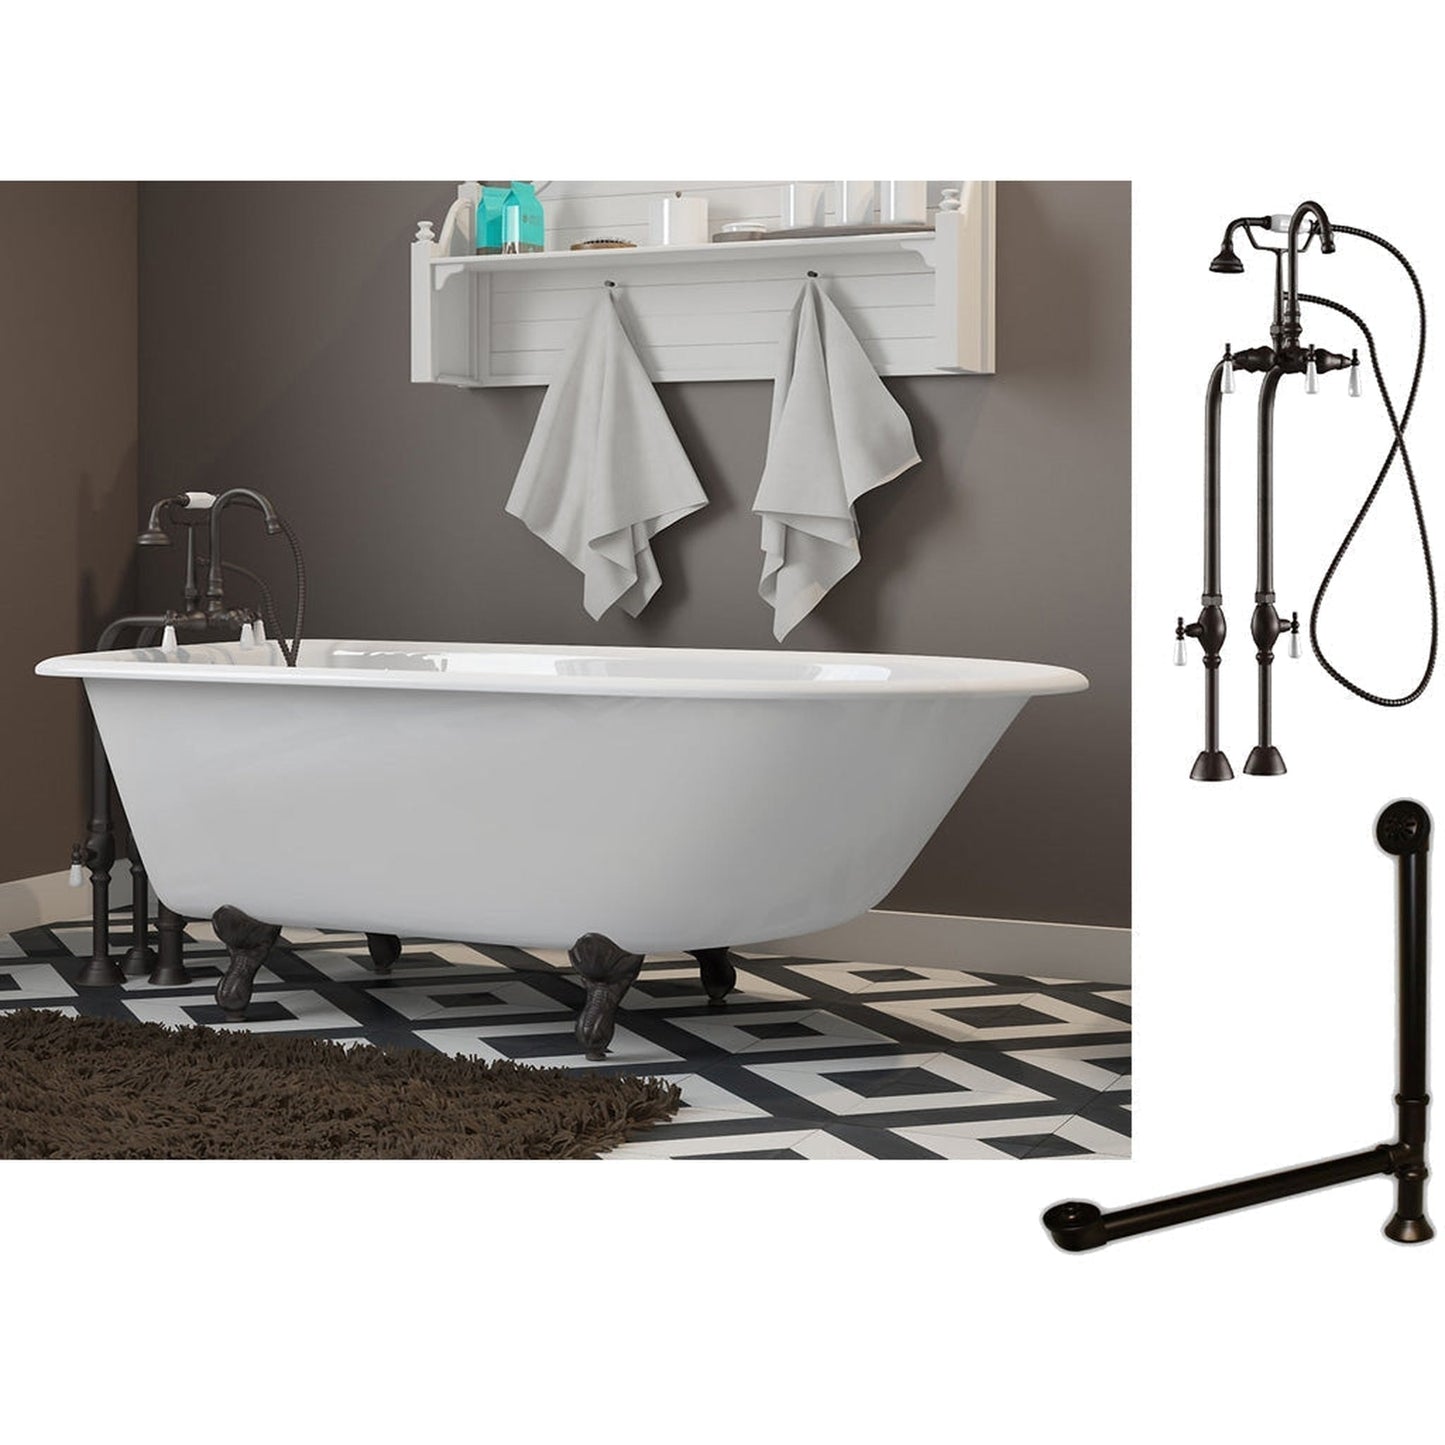 Cambridge Plumbing 60" White Cast Iron Rolled Rim Clawfoot Bathtub With No Deck Holes And Complete Plumbing Package Including Freestanding English Telephone Gooseneck Faucet, Drain And Overflow Assembly In Oil Rubbed Bronze